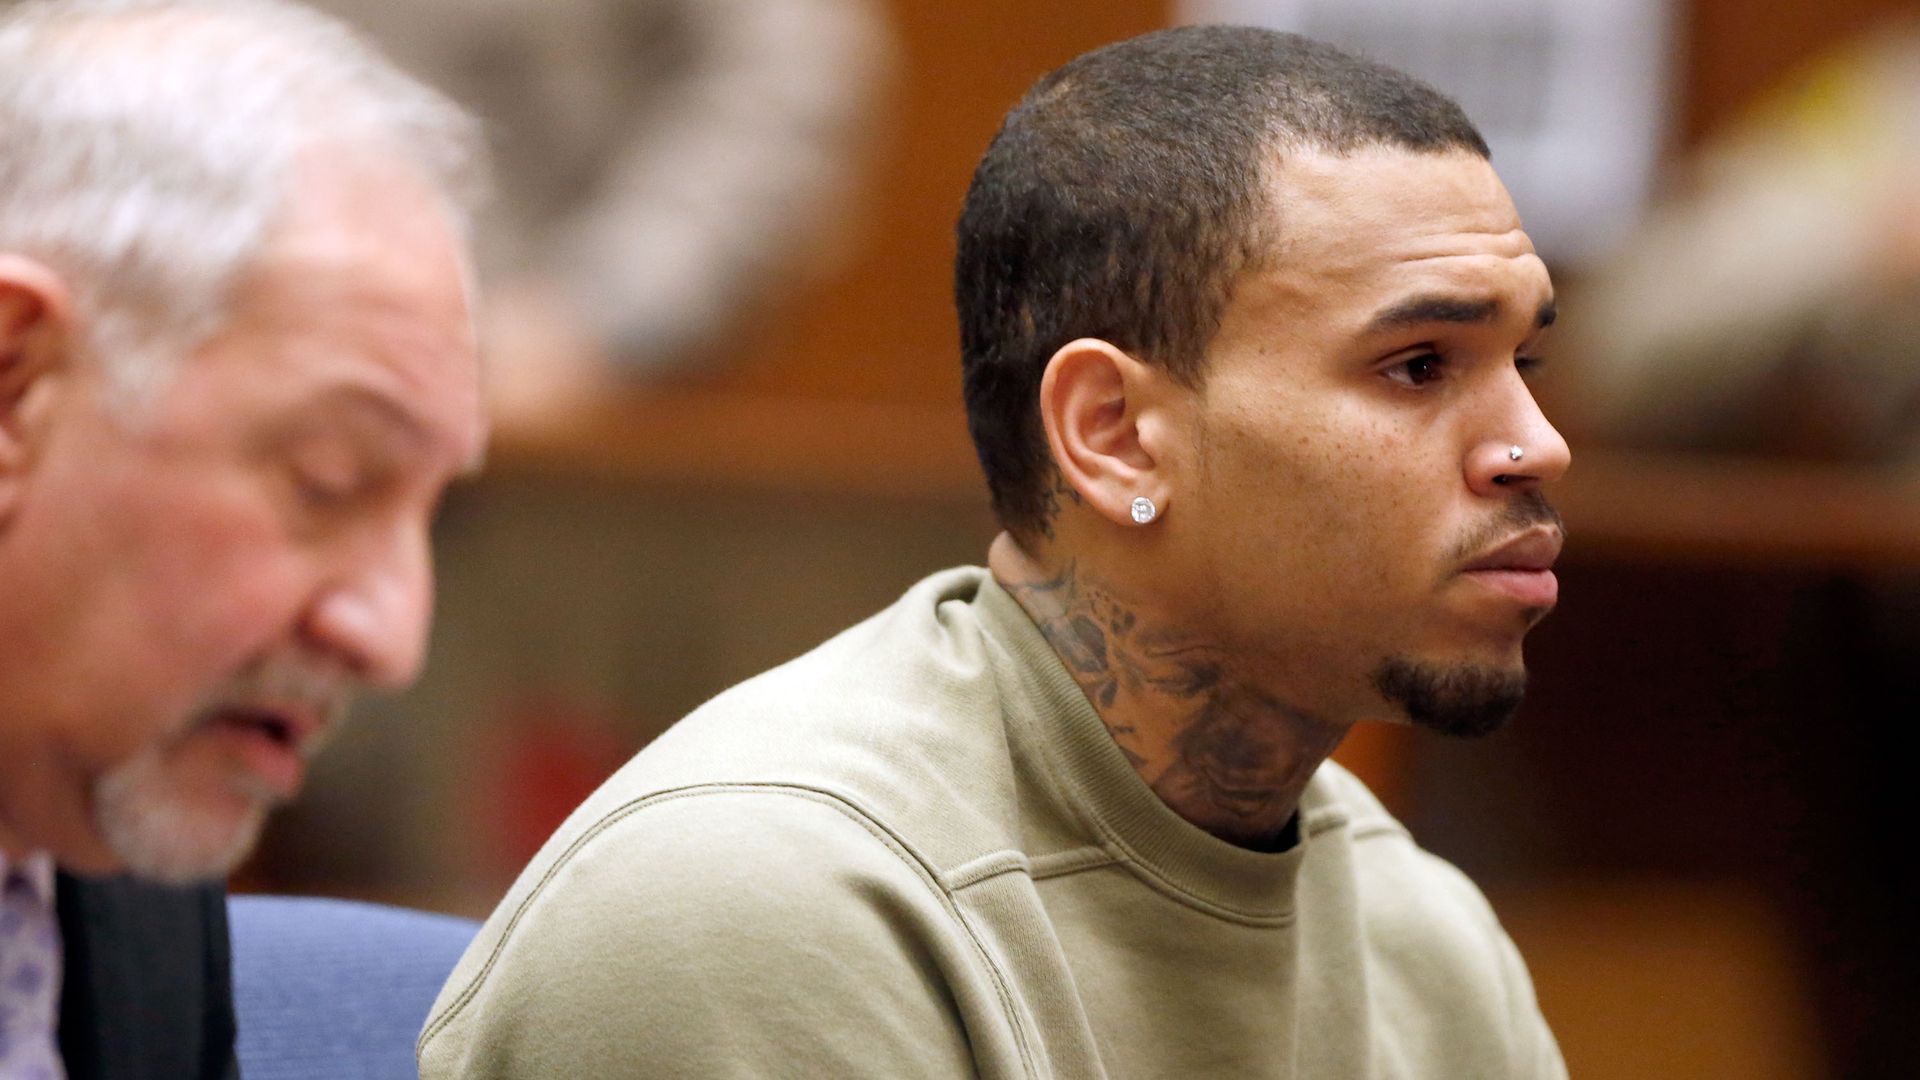 Singer Chris Brown attends a progress hearing at Los Angeles Superior Court on January 15, 2015